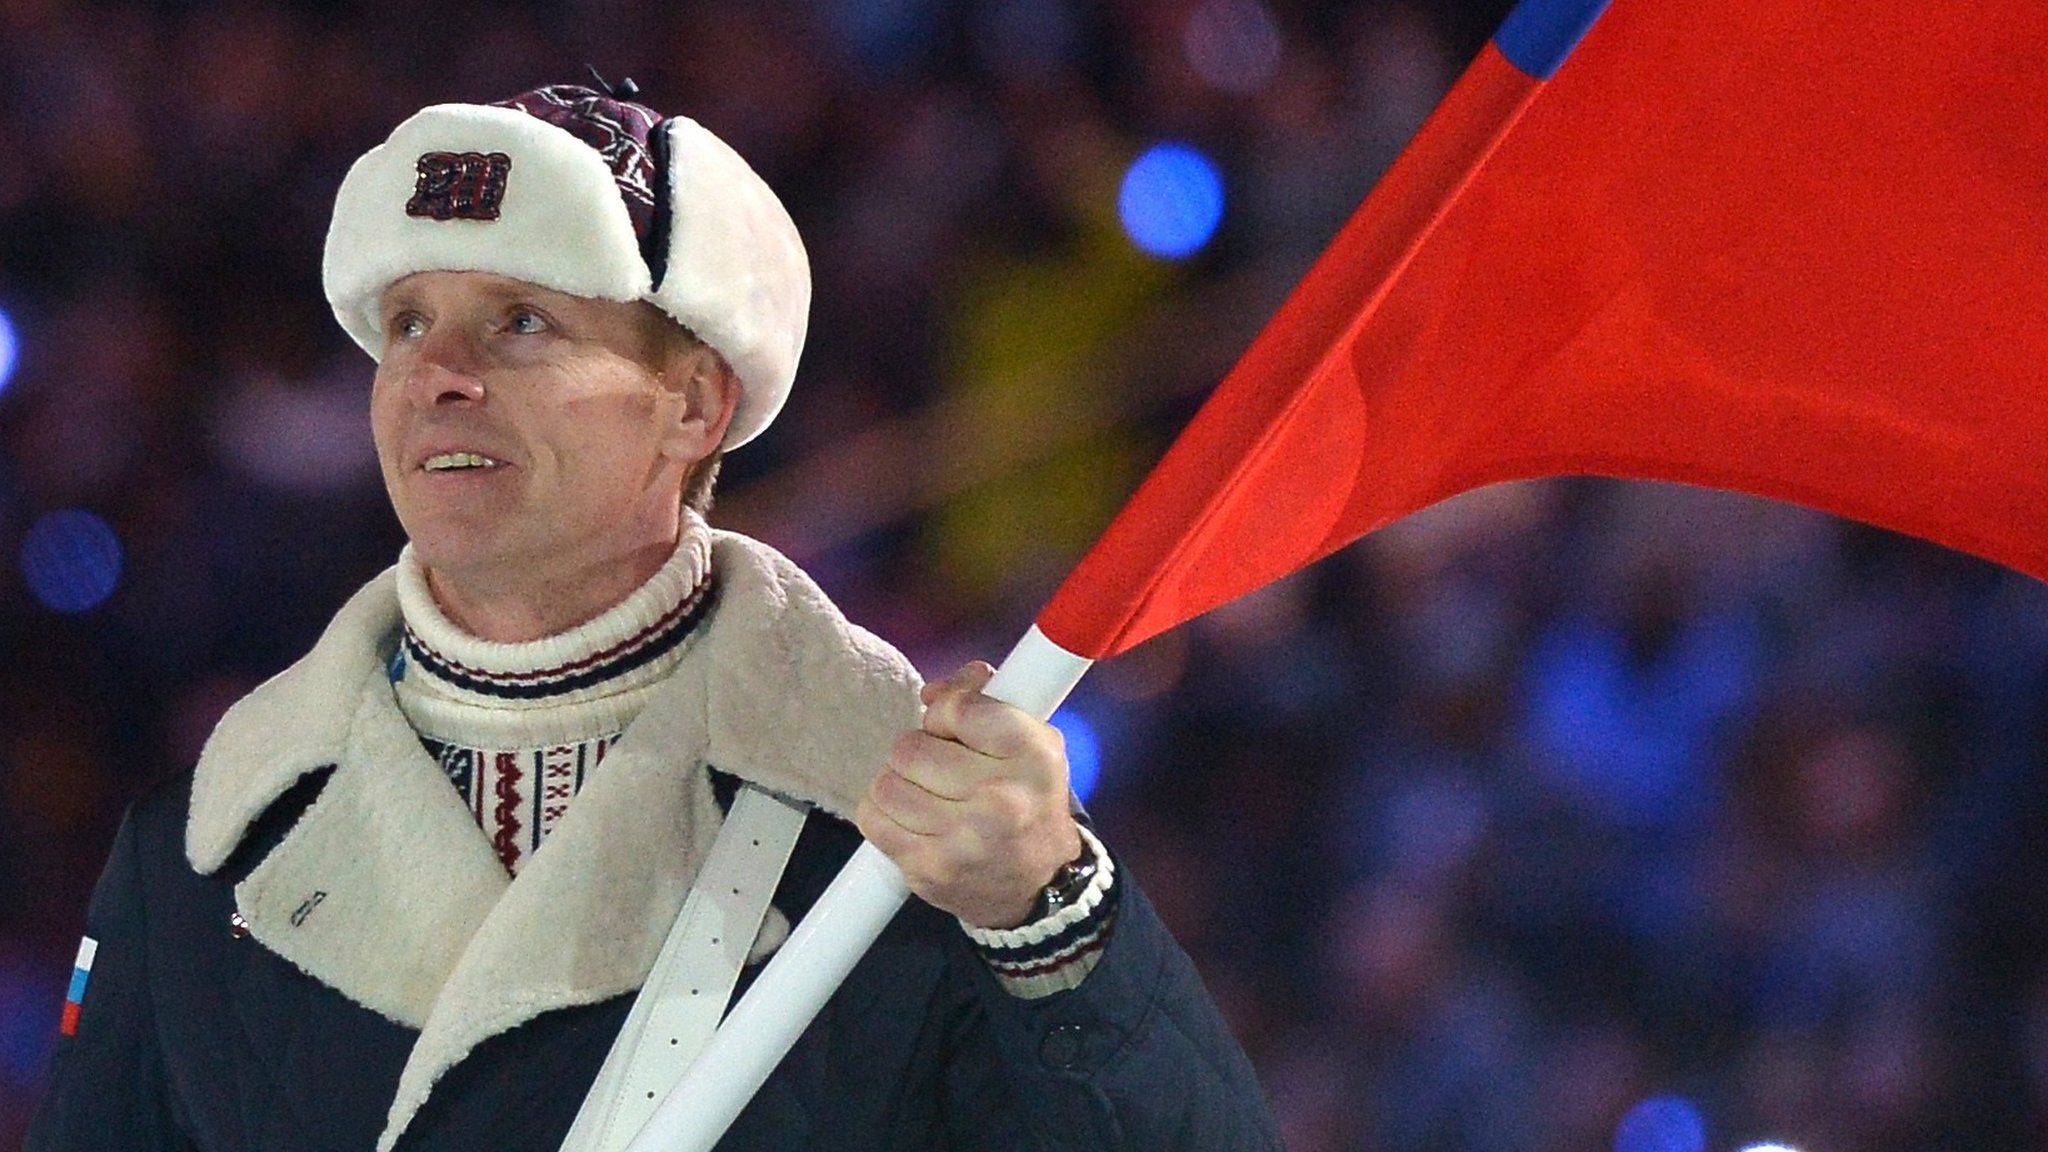 File photo taken in February 2014 shows Russia's flag bearer, bobsledder Alexander Zubkov, leading his national delegation during the Opening Ceremony of the Sochi Winter Olympics